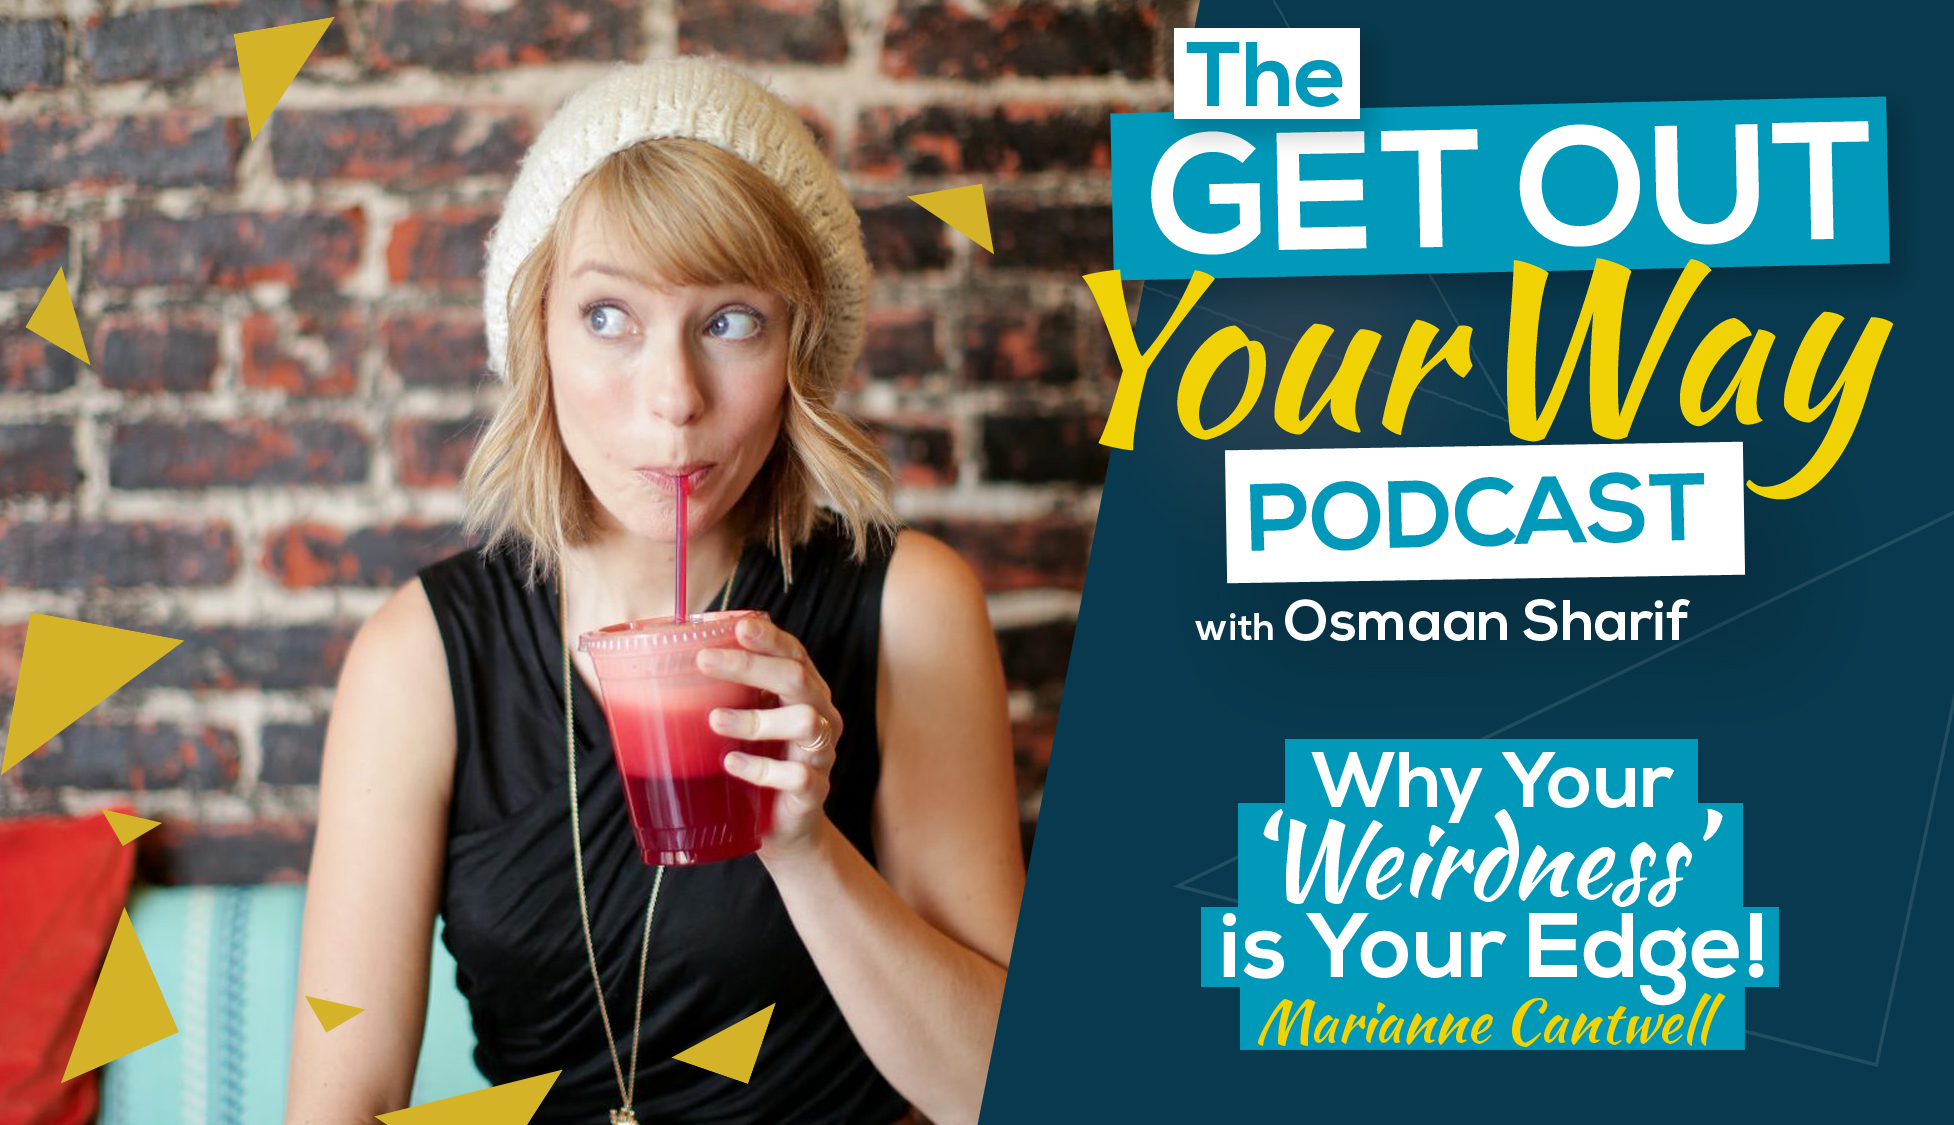 Why Your Weirdness Is Your Edge with Marianne Cantwell